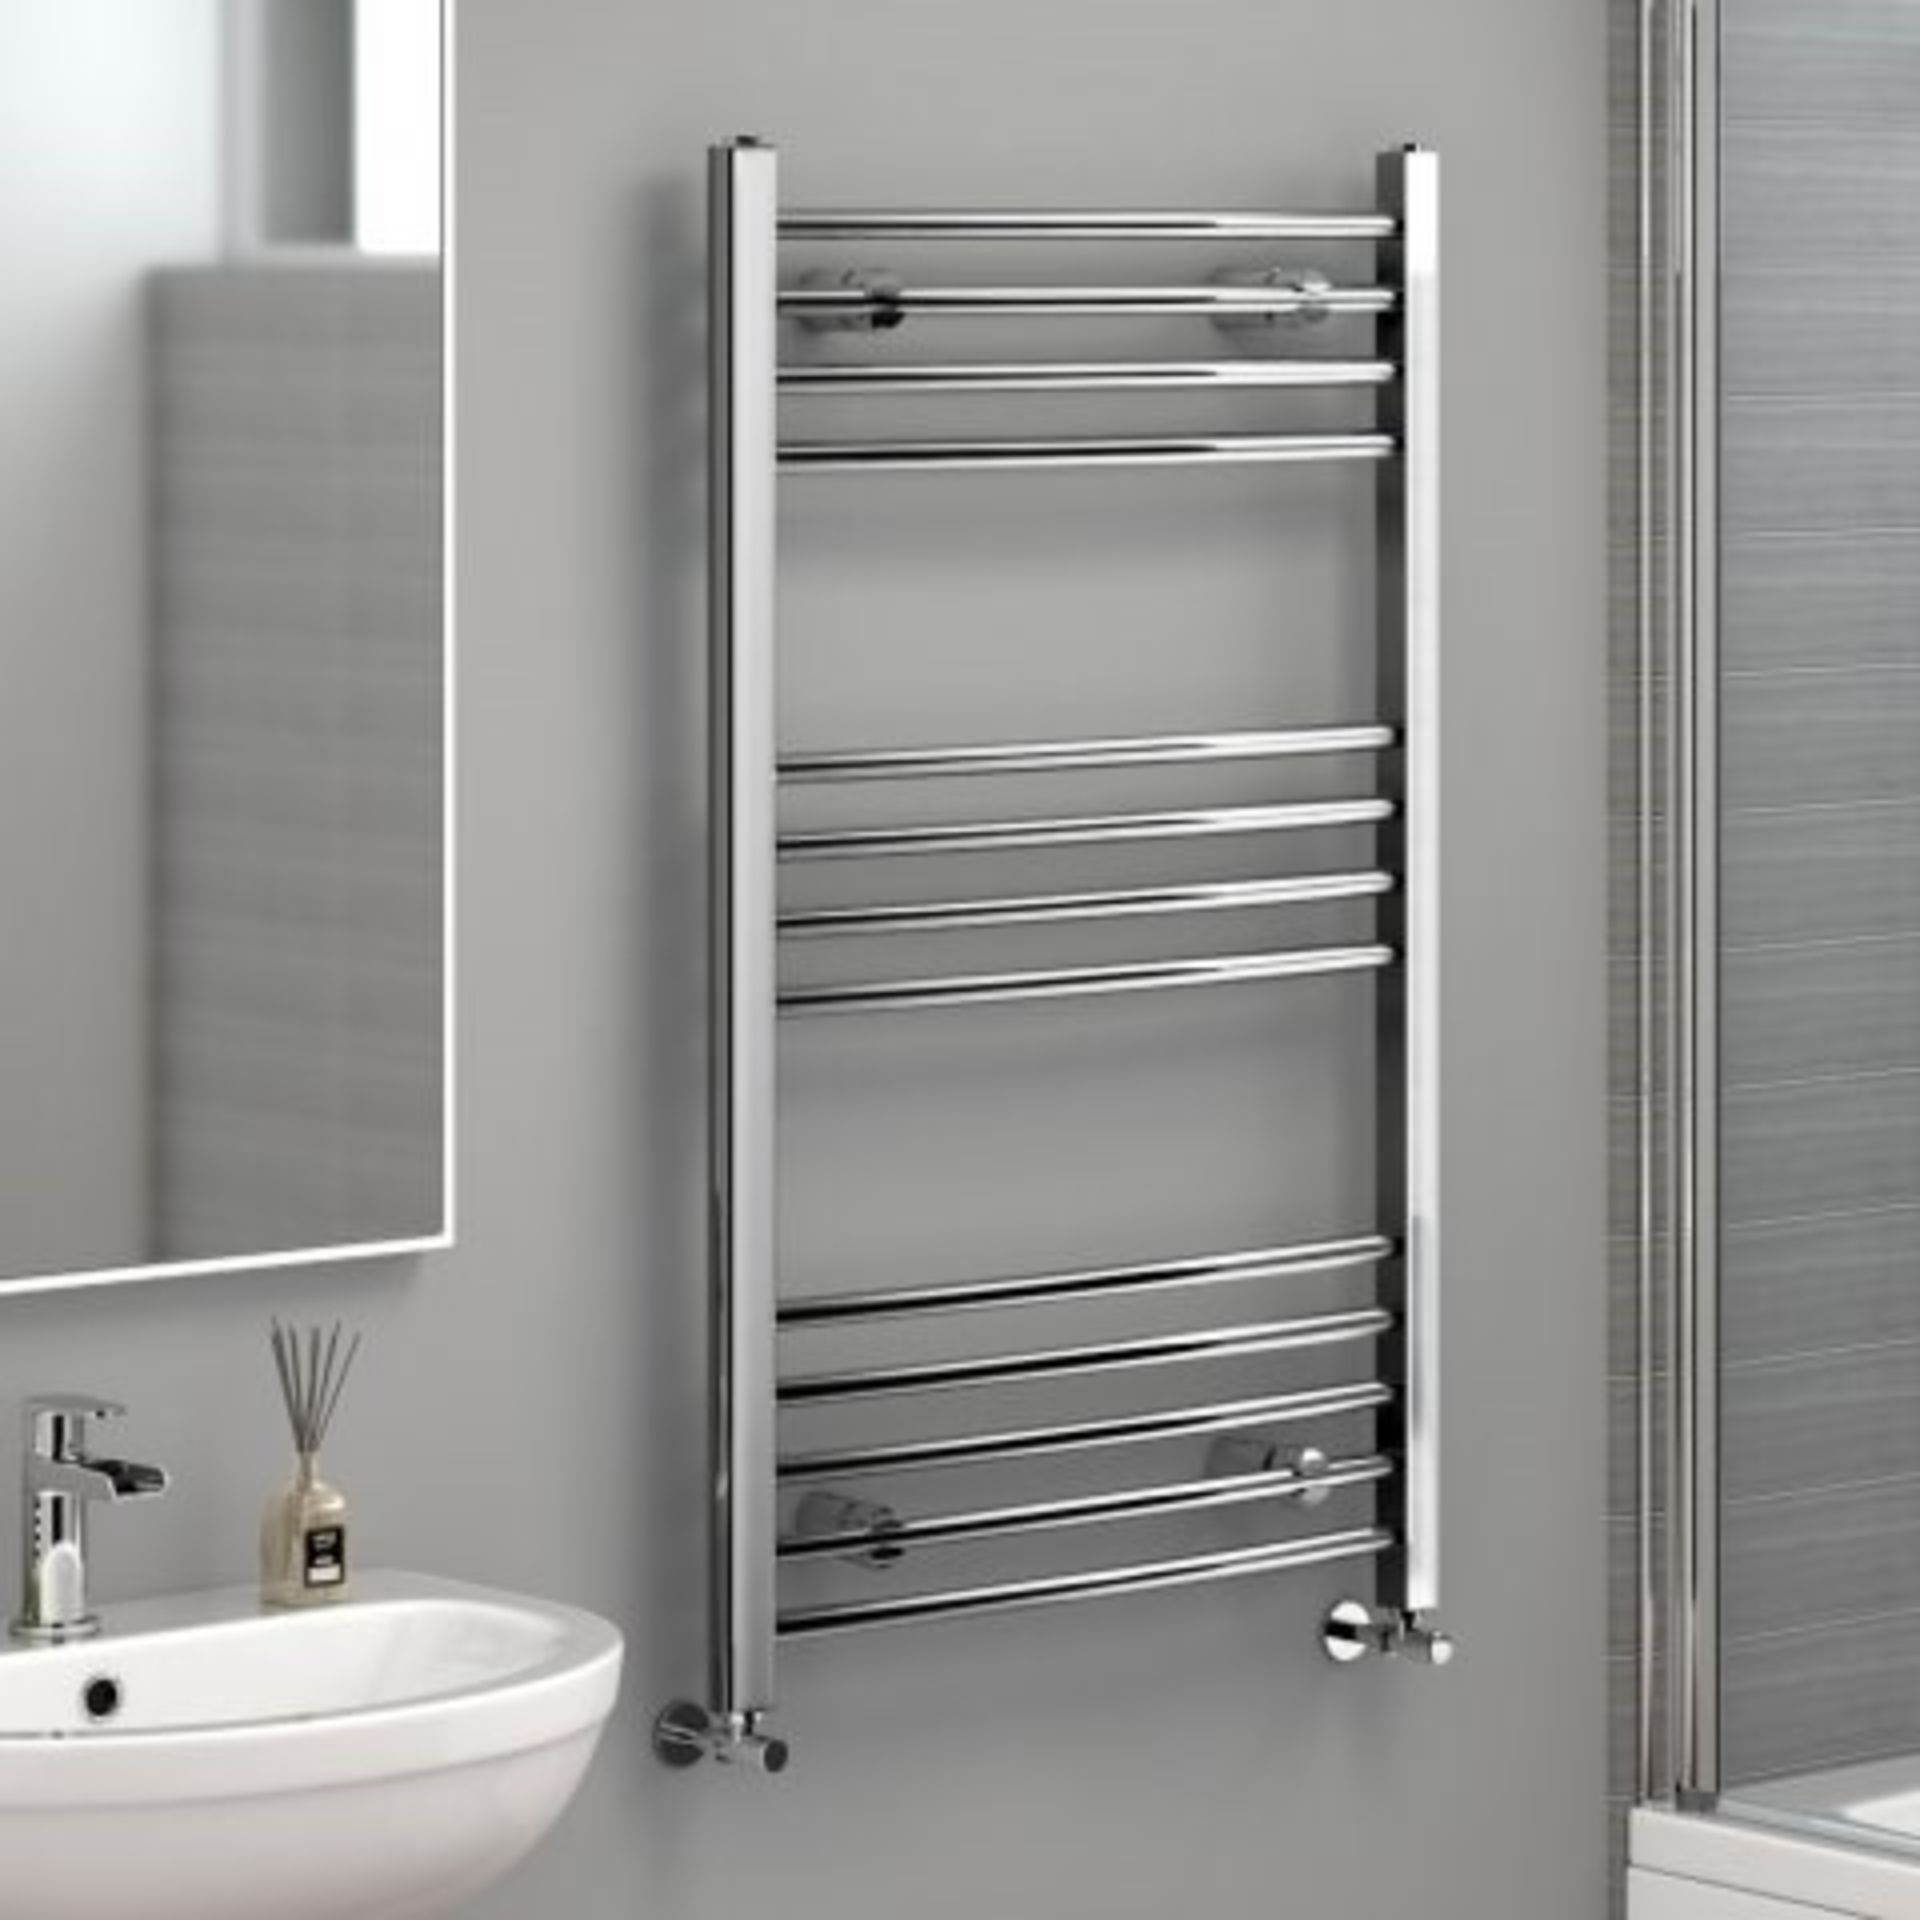 BRAND NEW BOXED 1200x600mm - 20mm Tubes - RRP £219.99.Chrome Curved Rail Ladder Towel Radiator...